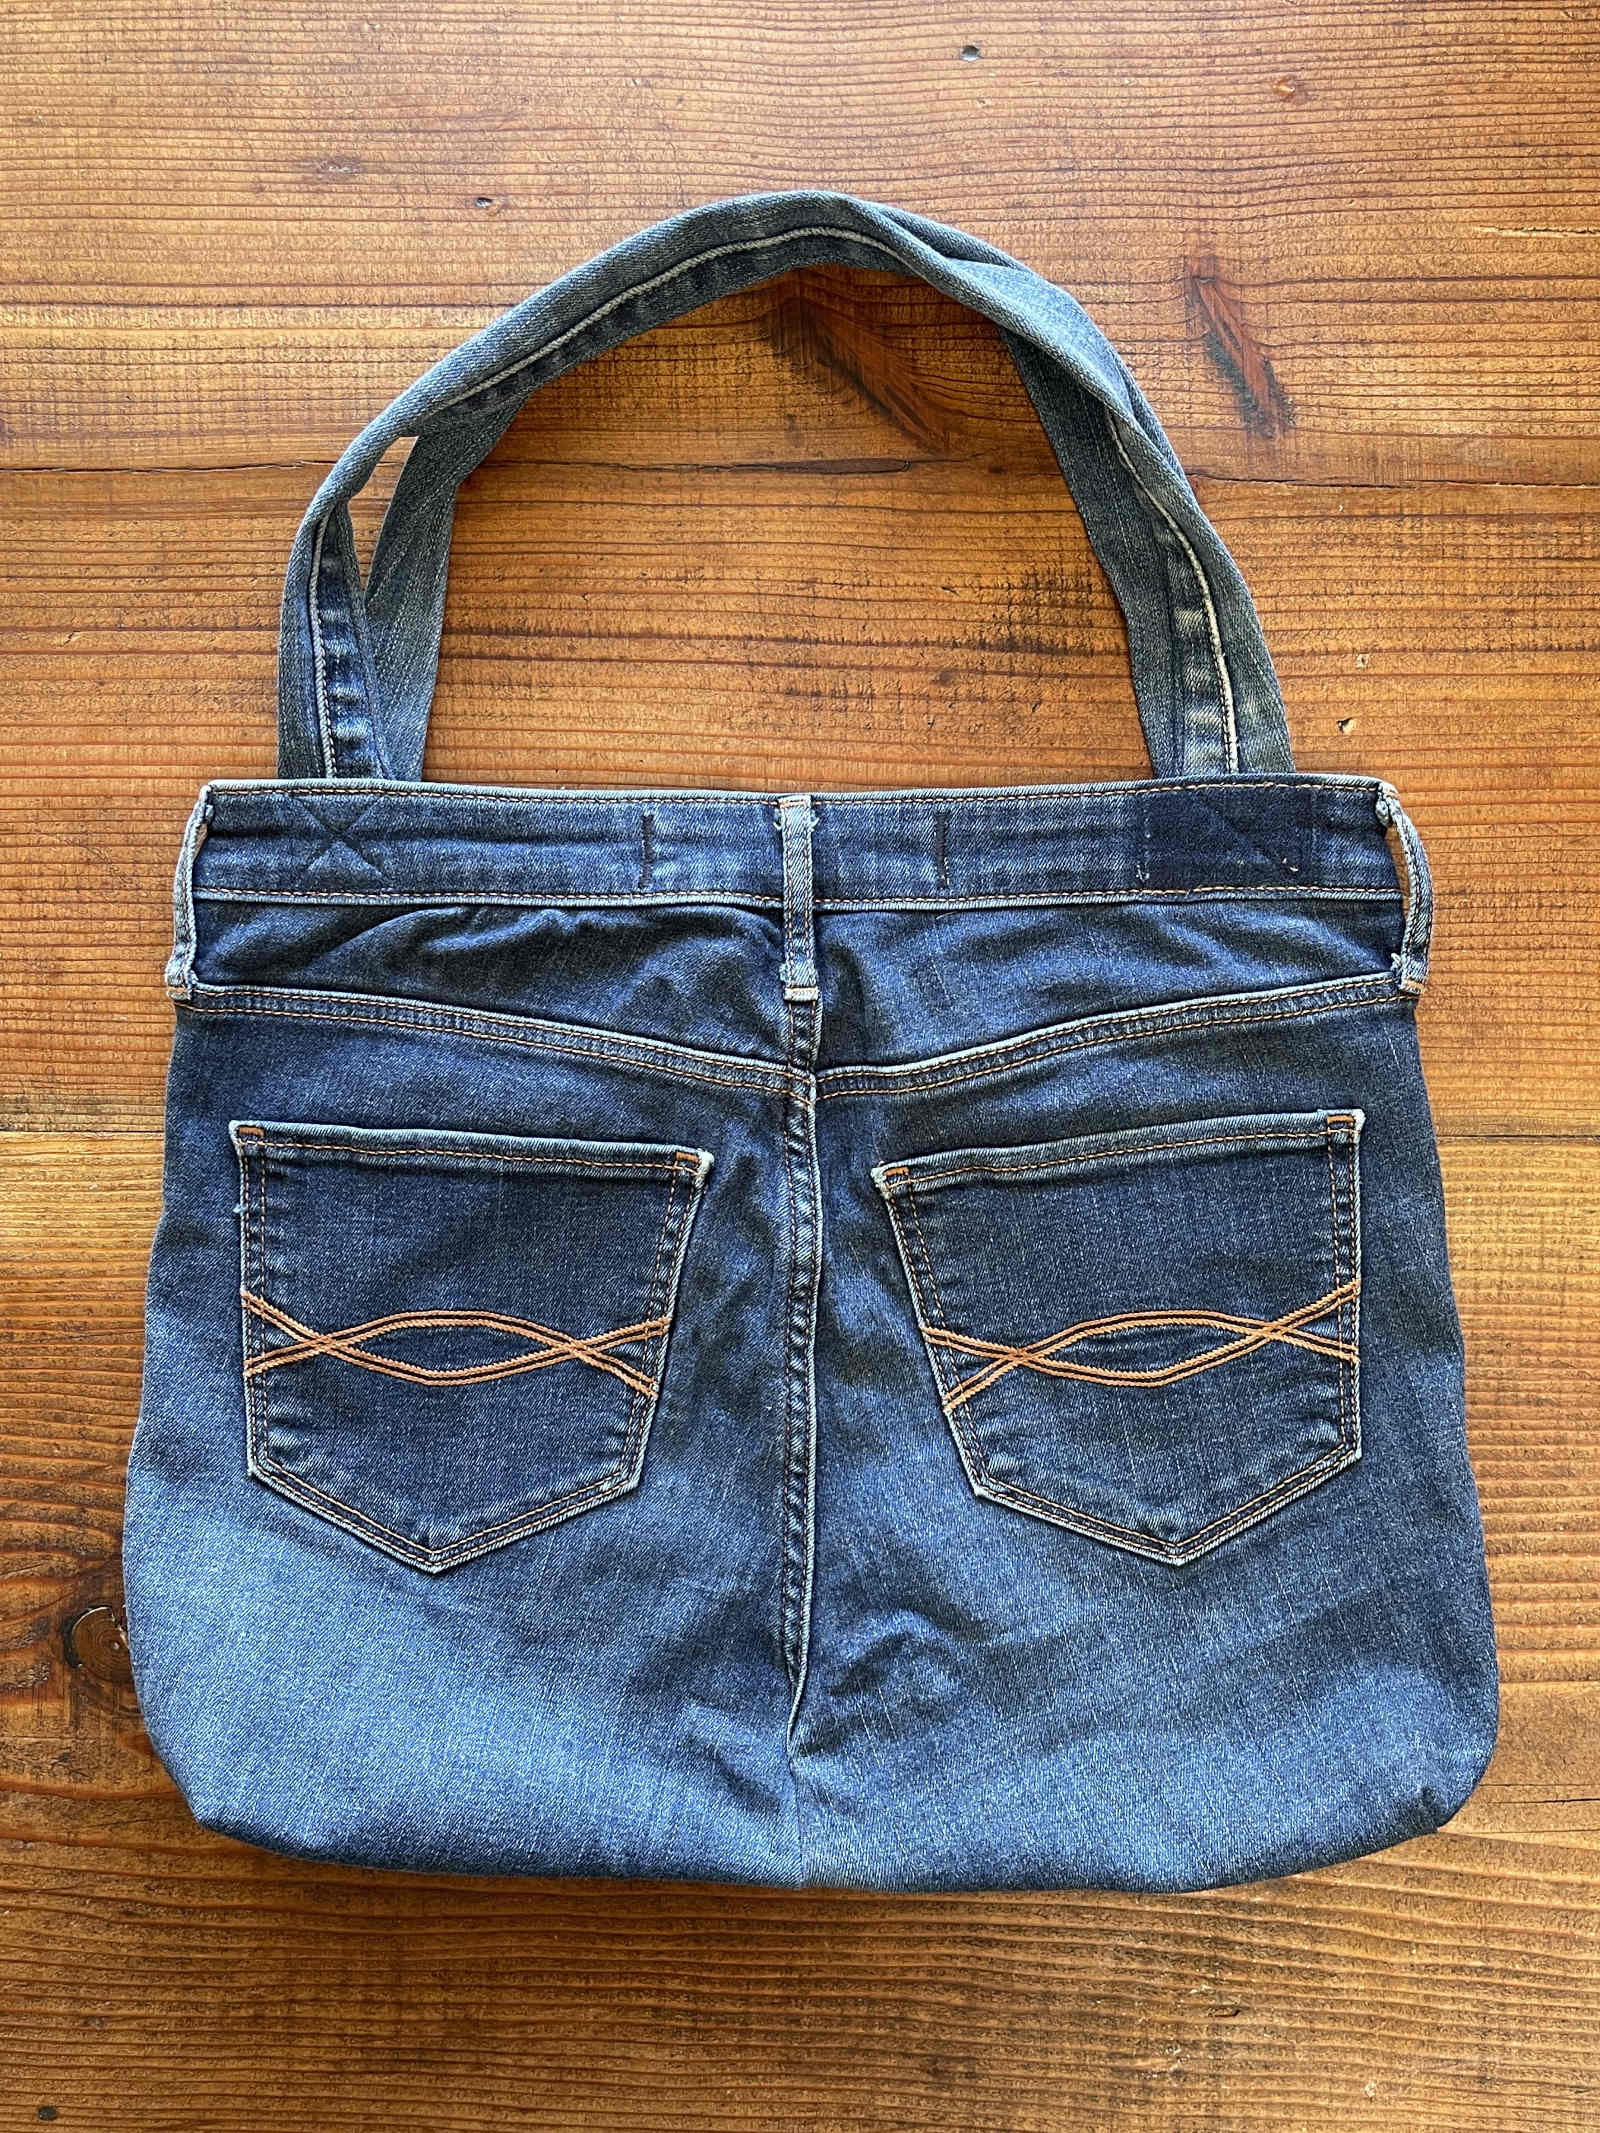 Recycle Denim: Floor Mat From Waistbands and Inseams : 5 Steps